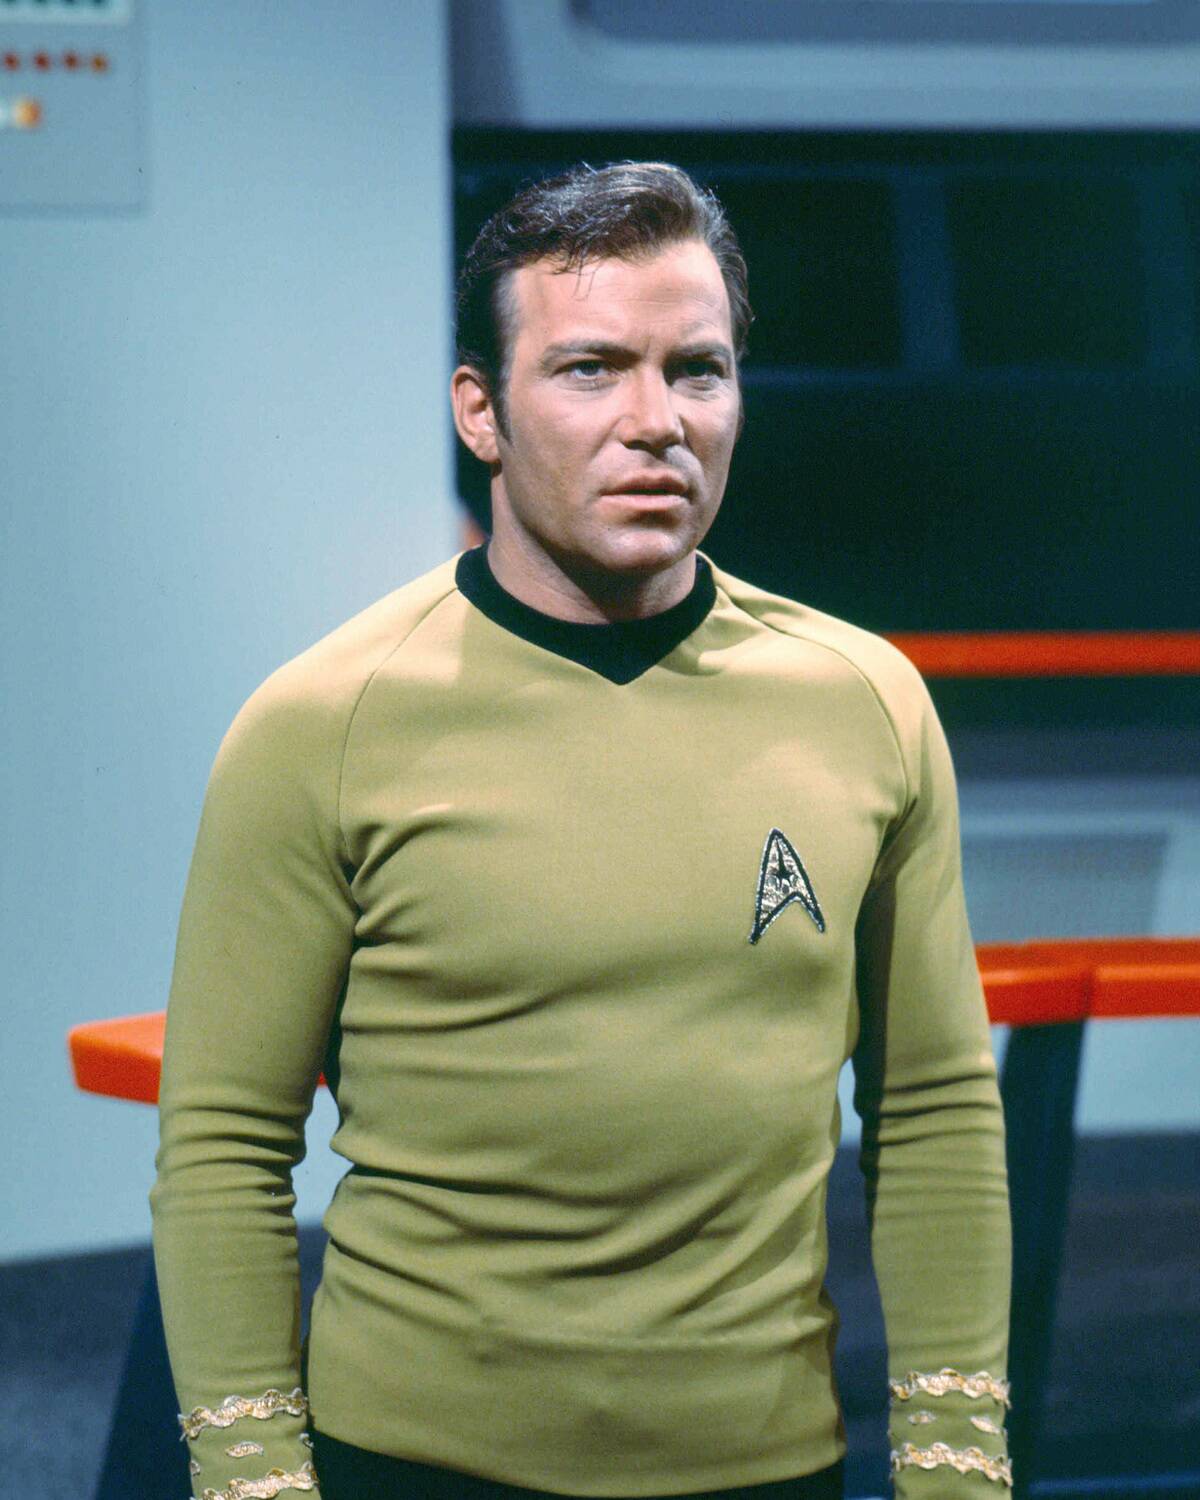 <p>William Shatner, despite his fame as a versatile actor, faced a physical challenge when it came to executing the iconic Spock salute. He couldn't do it.</p> <p>Stagehands resorted to clever tricks, using fishing lines to carefully tie his fingers apart, ensuring the desired hand gesture. This ingenious solution enabled Shatner to flawlessly showcase the Vulcan salute.</p>